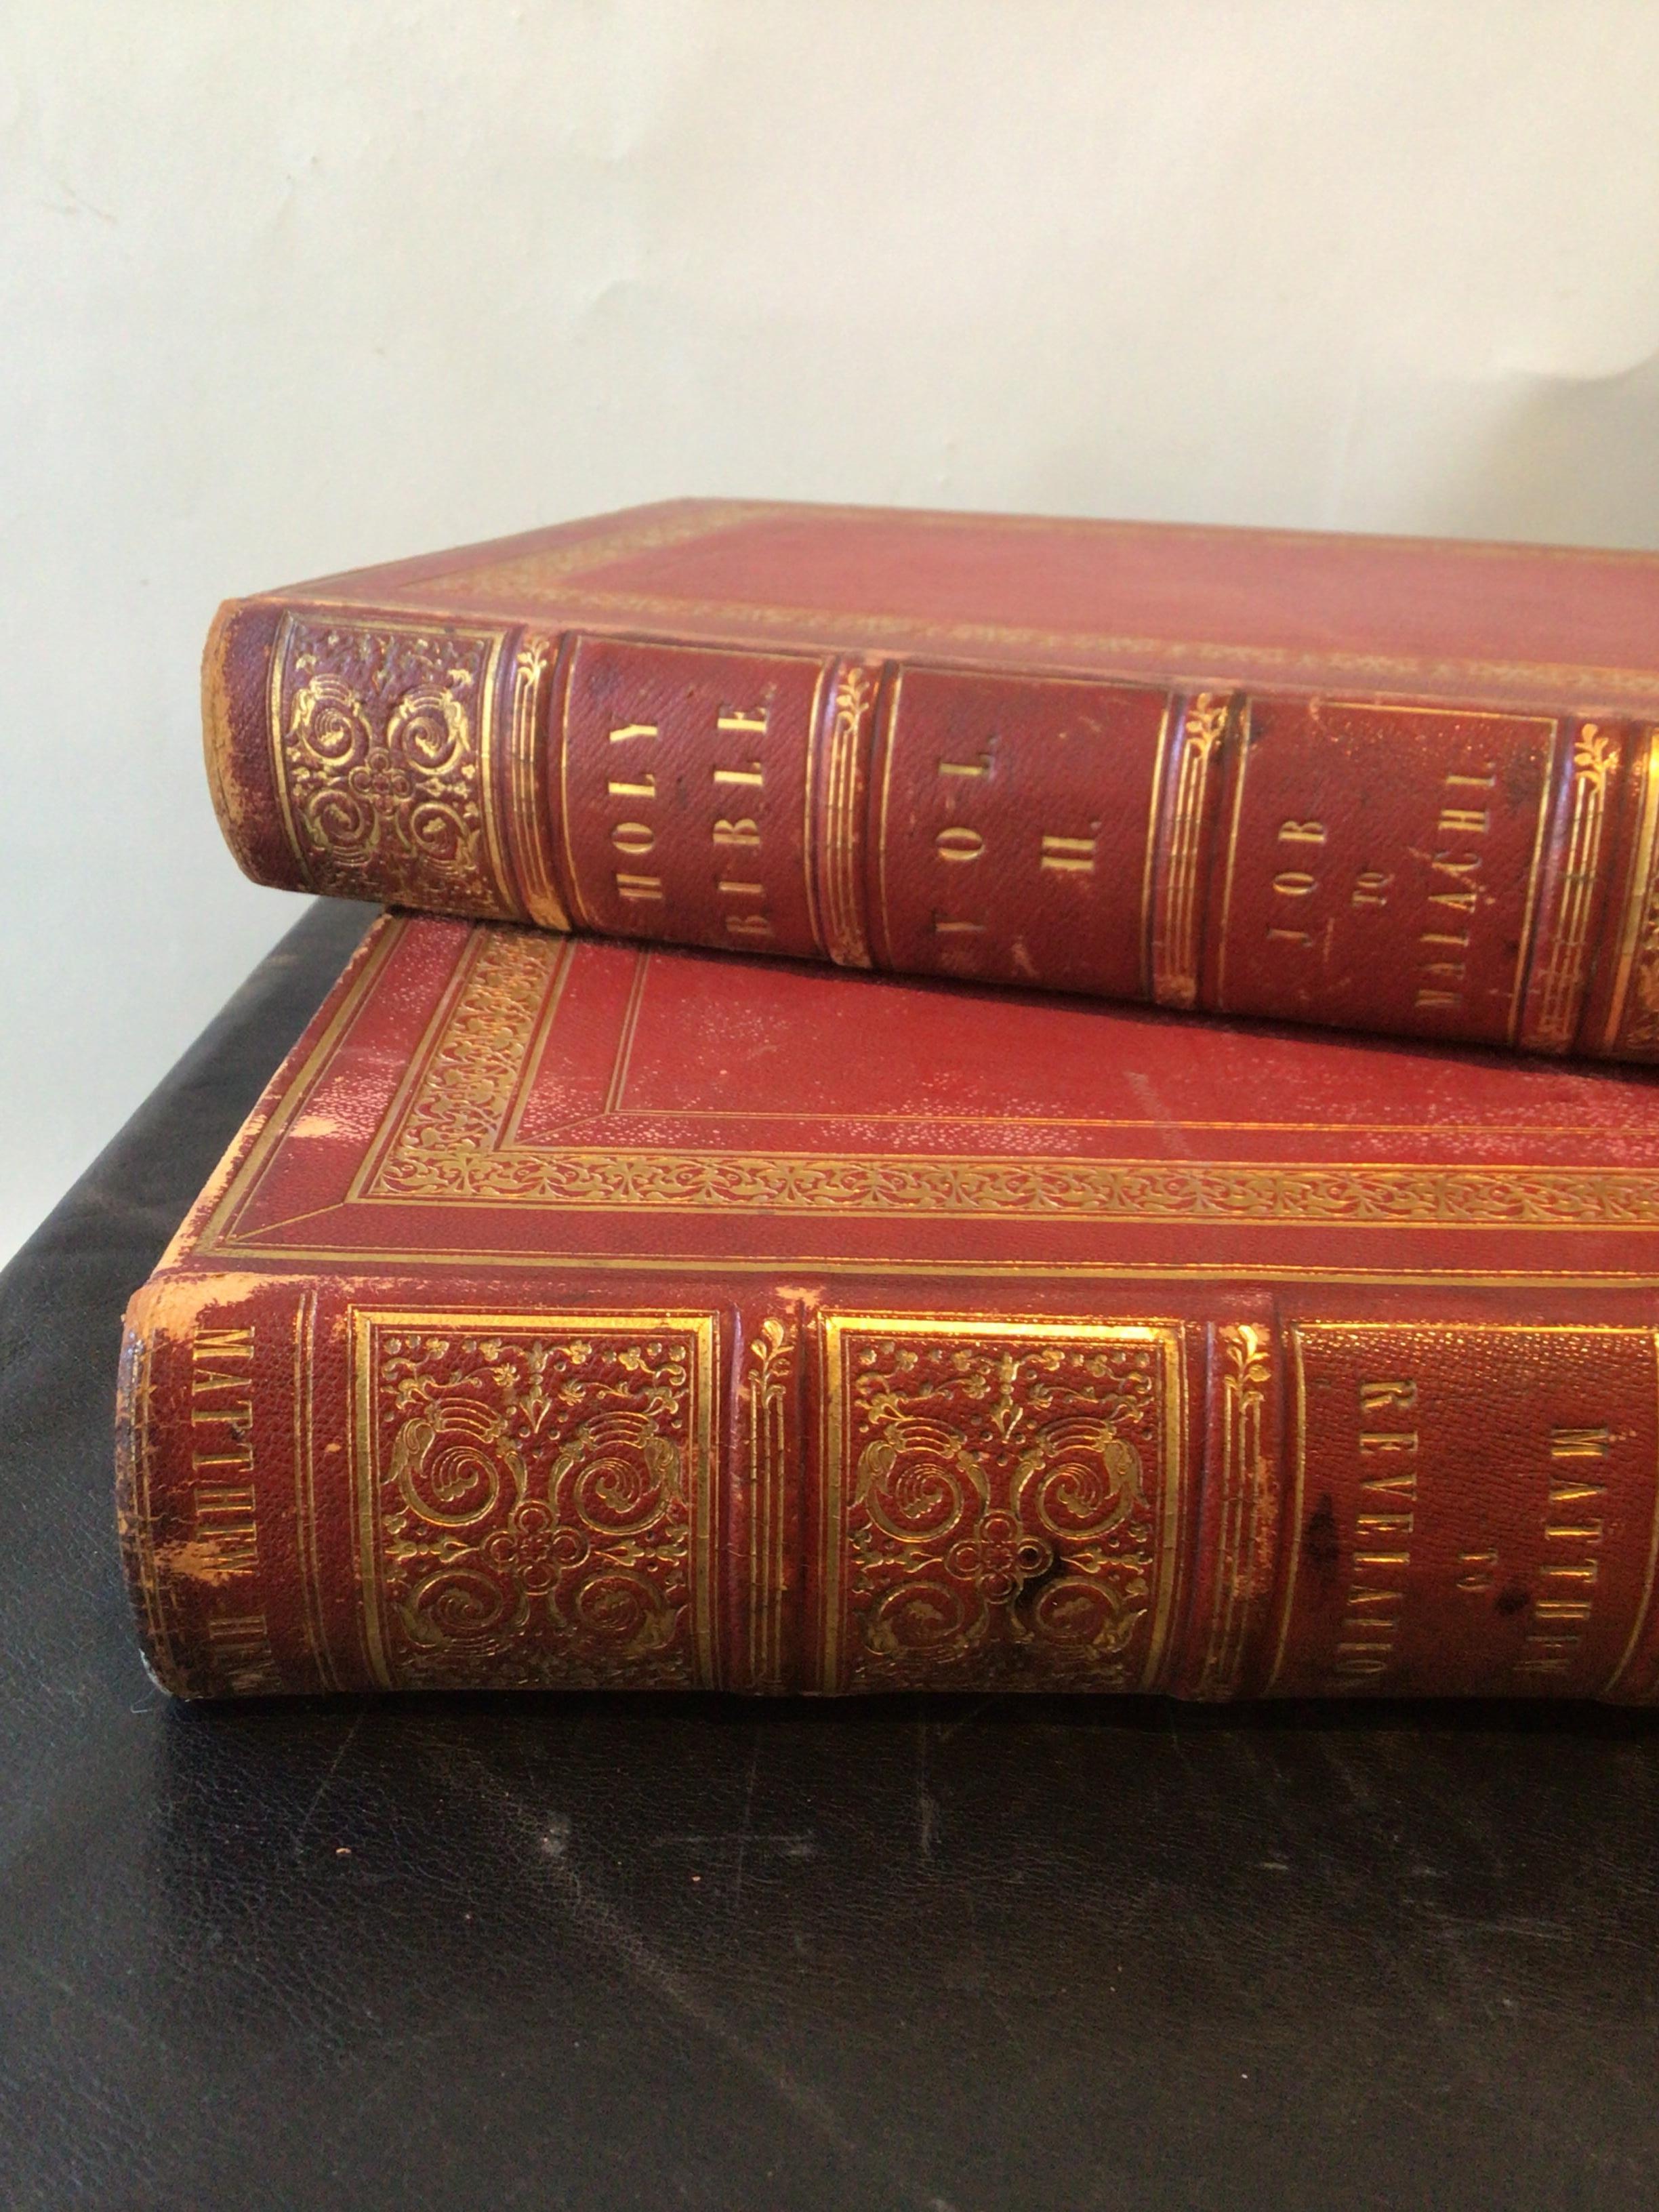 1820s 3 Volume Family Bible Commentary by Mathew Henry For Sale 7